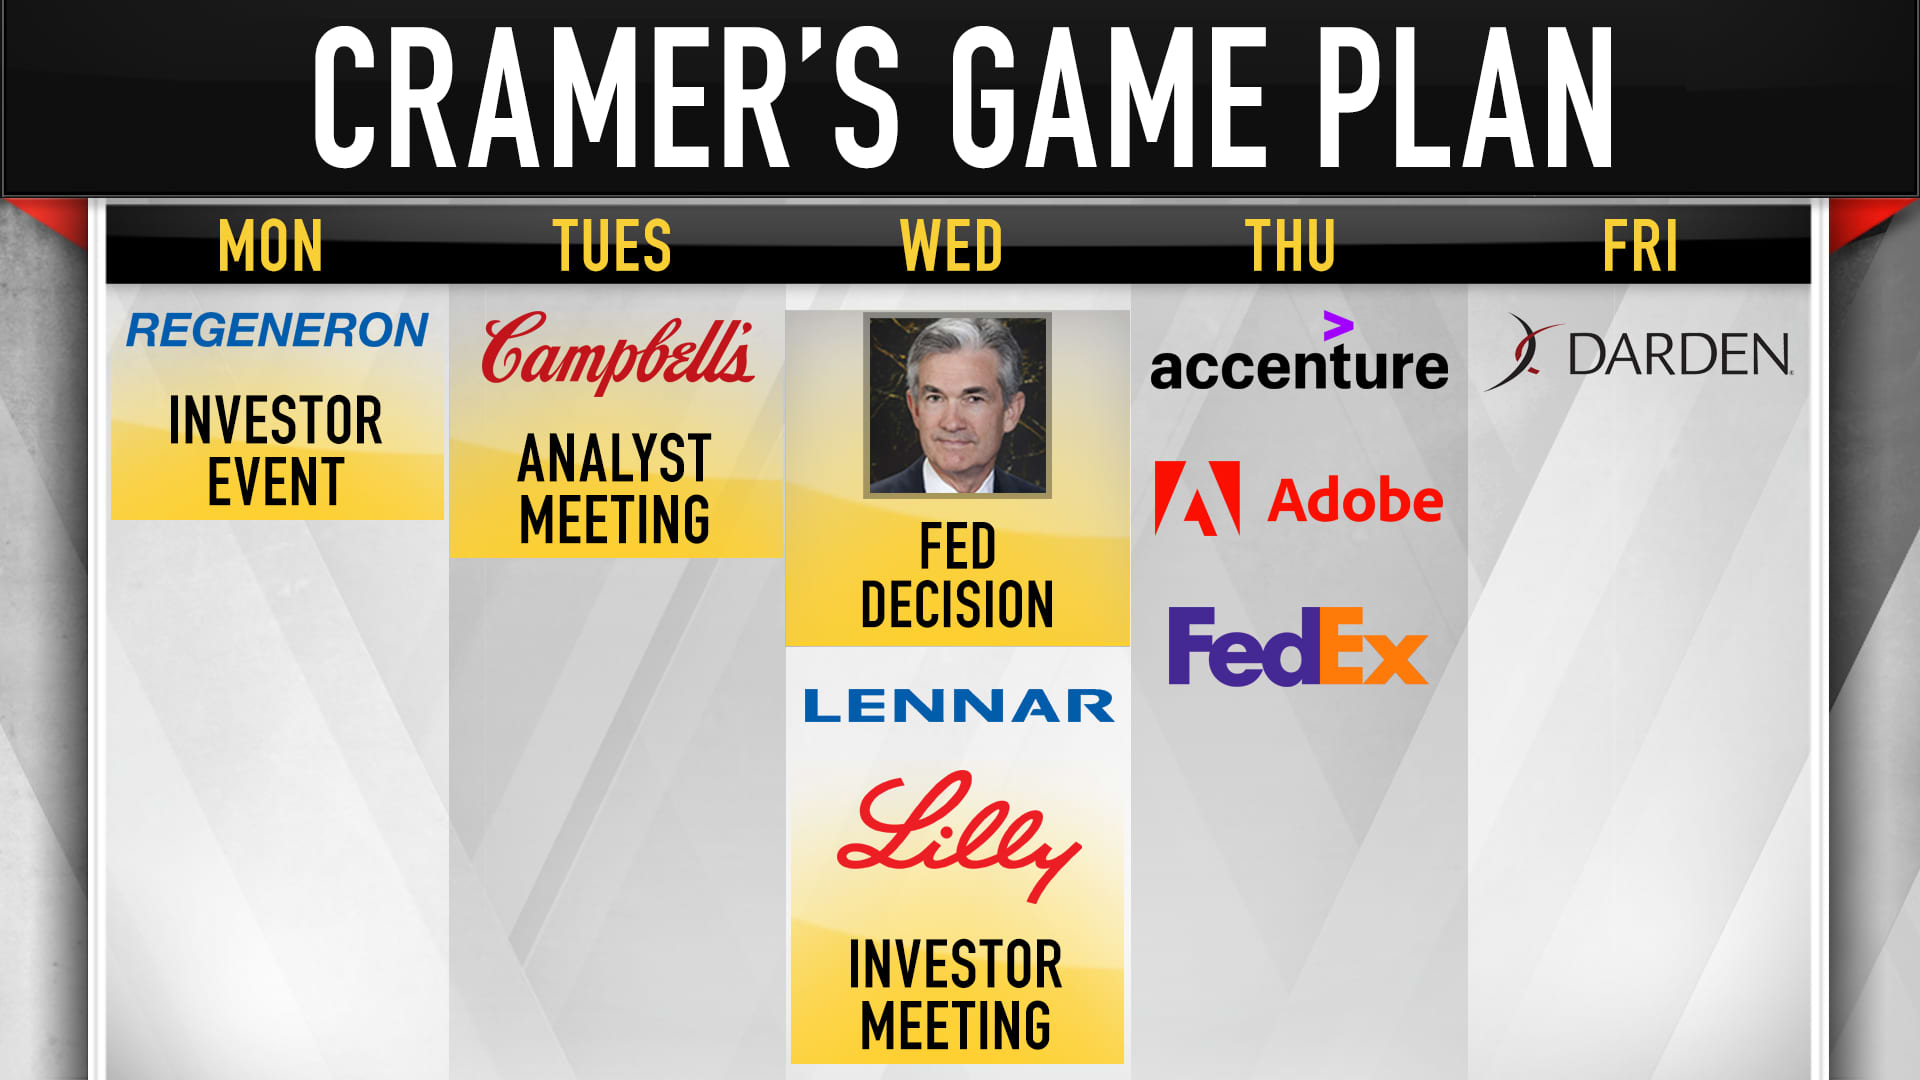 Jim Cramer's game plan for the trading week of Dec. 13.